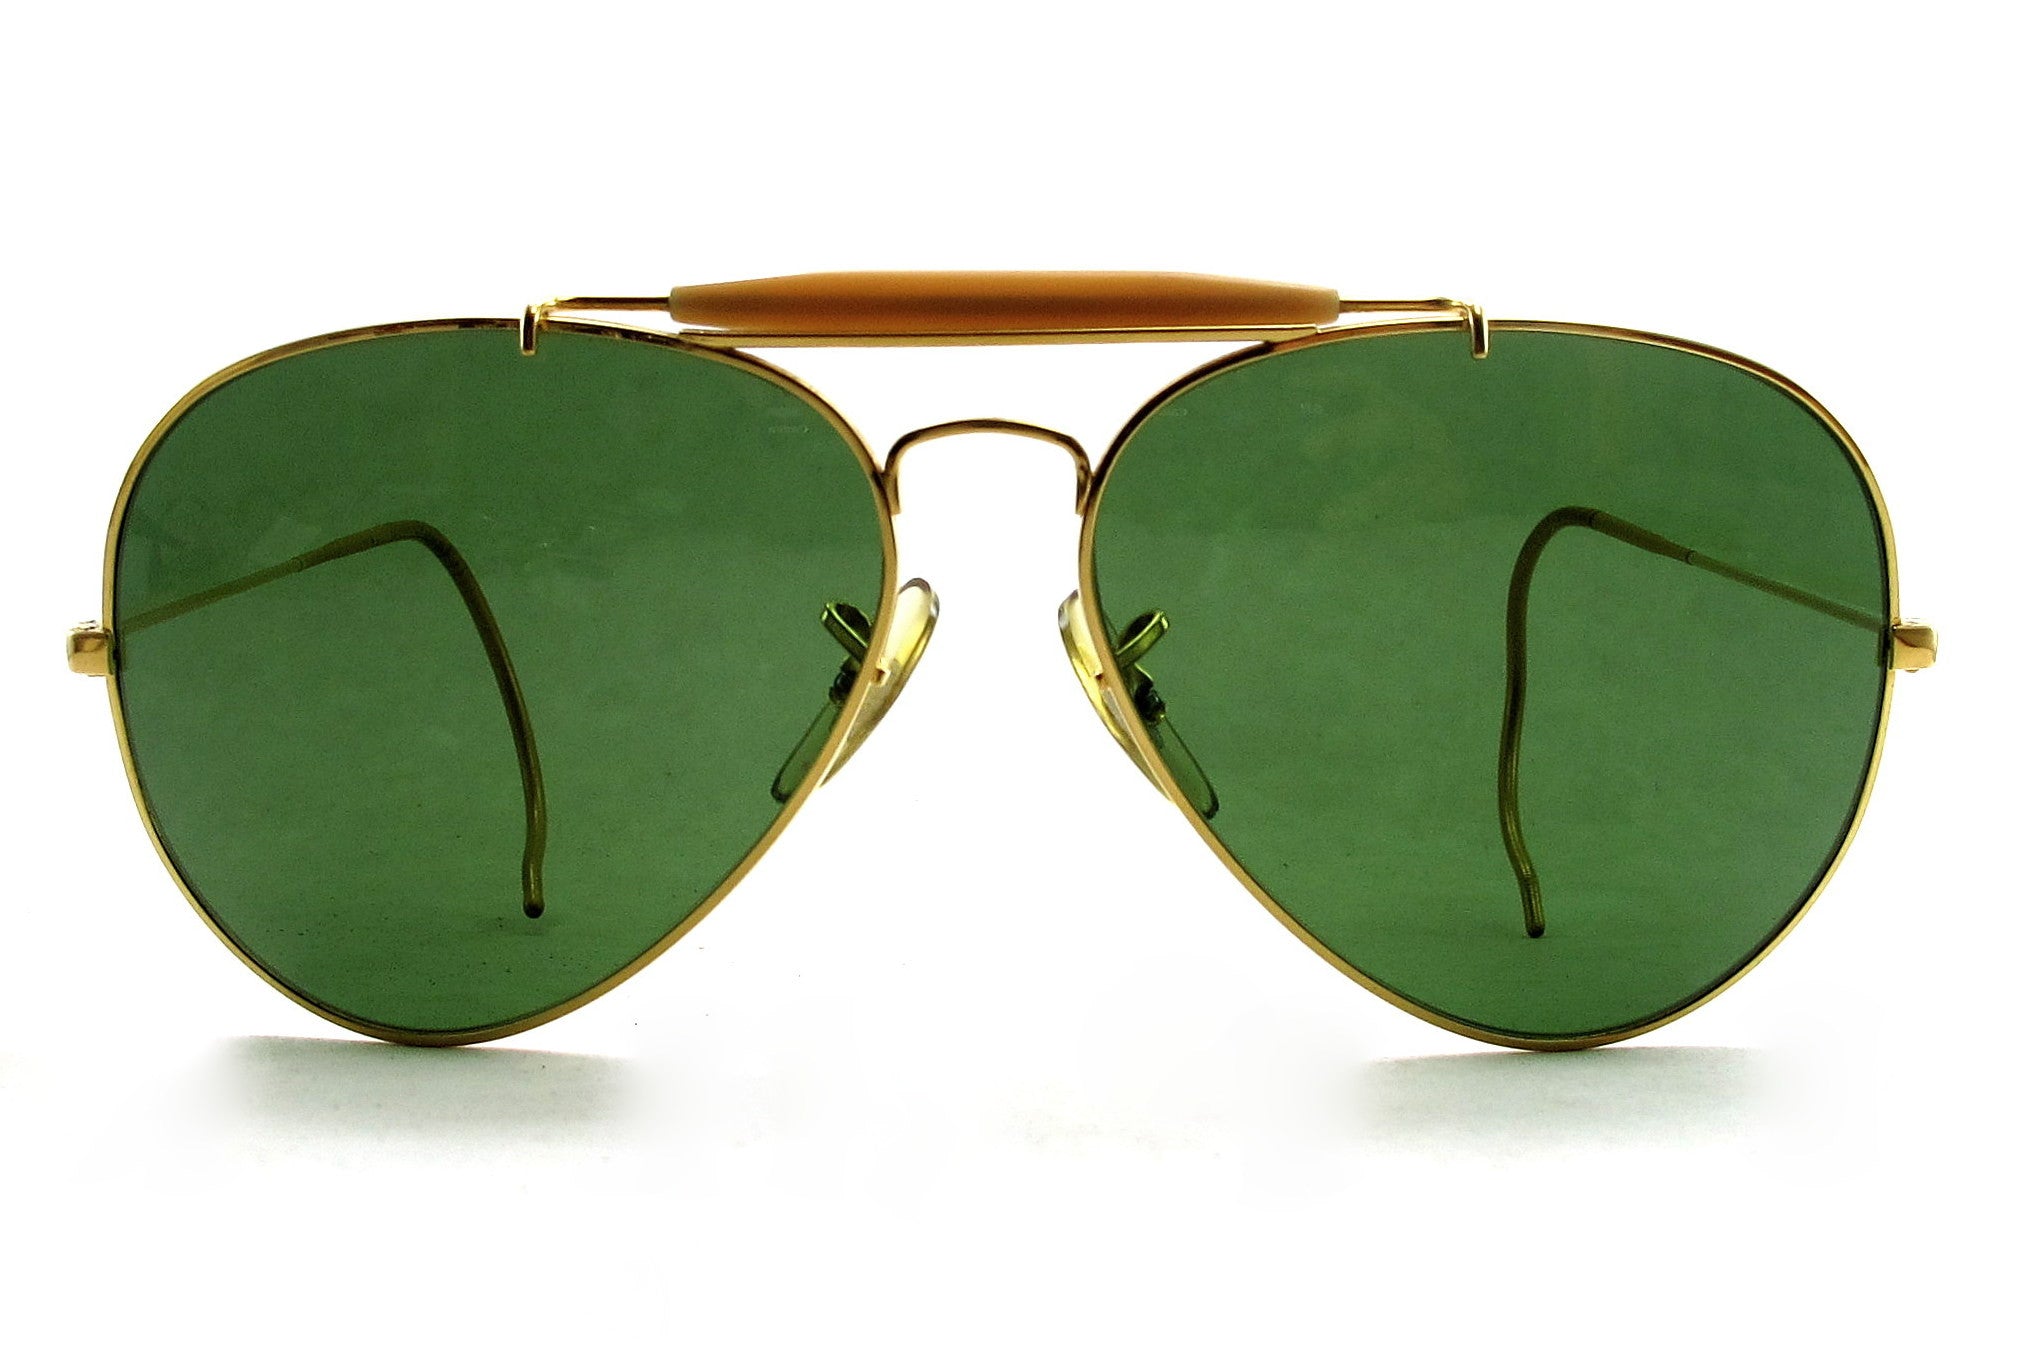 allynscura | Ray Ban Outdoorsman Aviator sunglasses (by Bausch & Lomb)